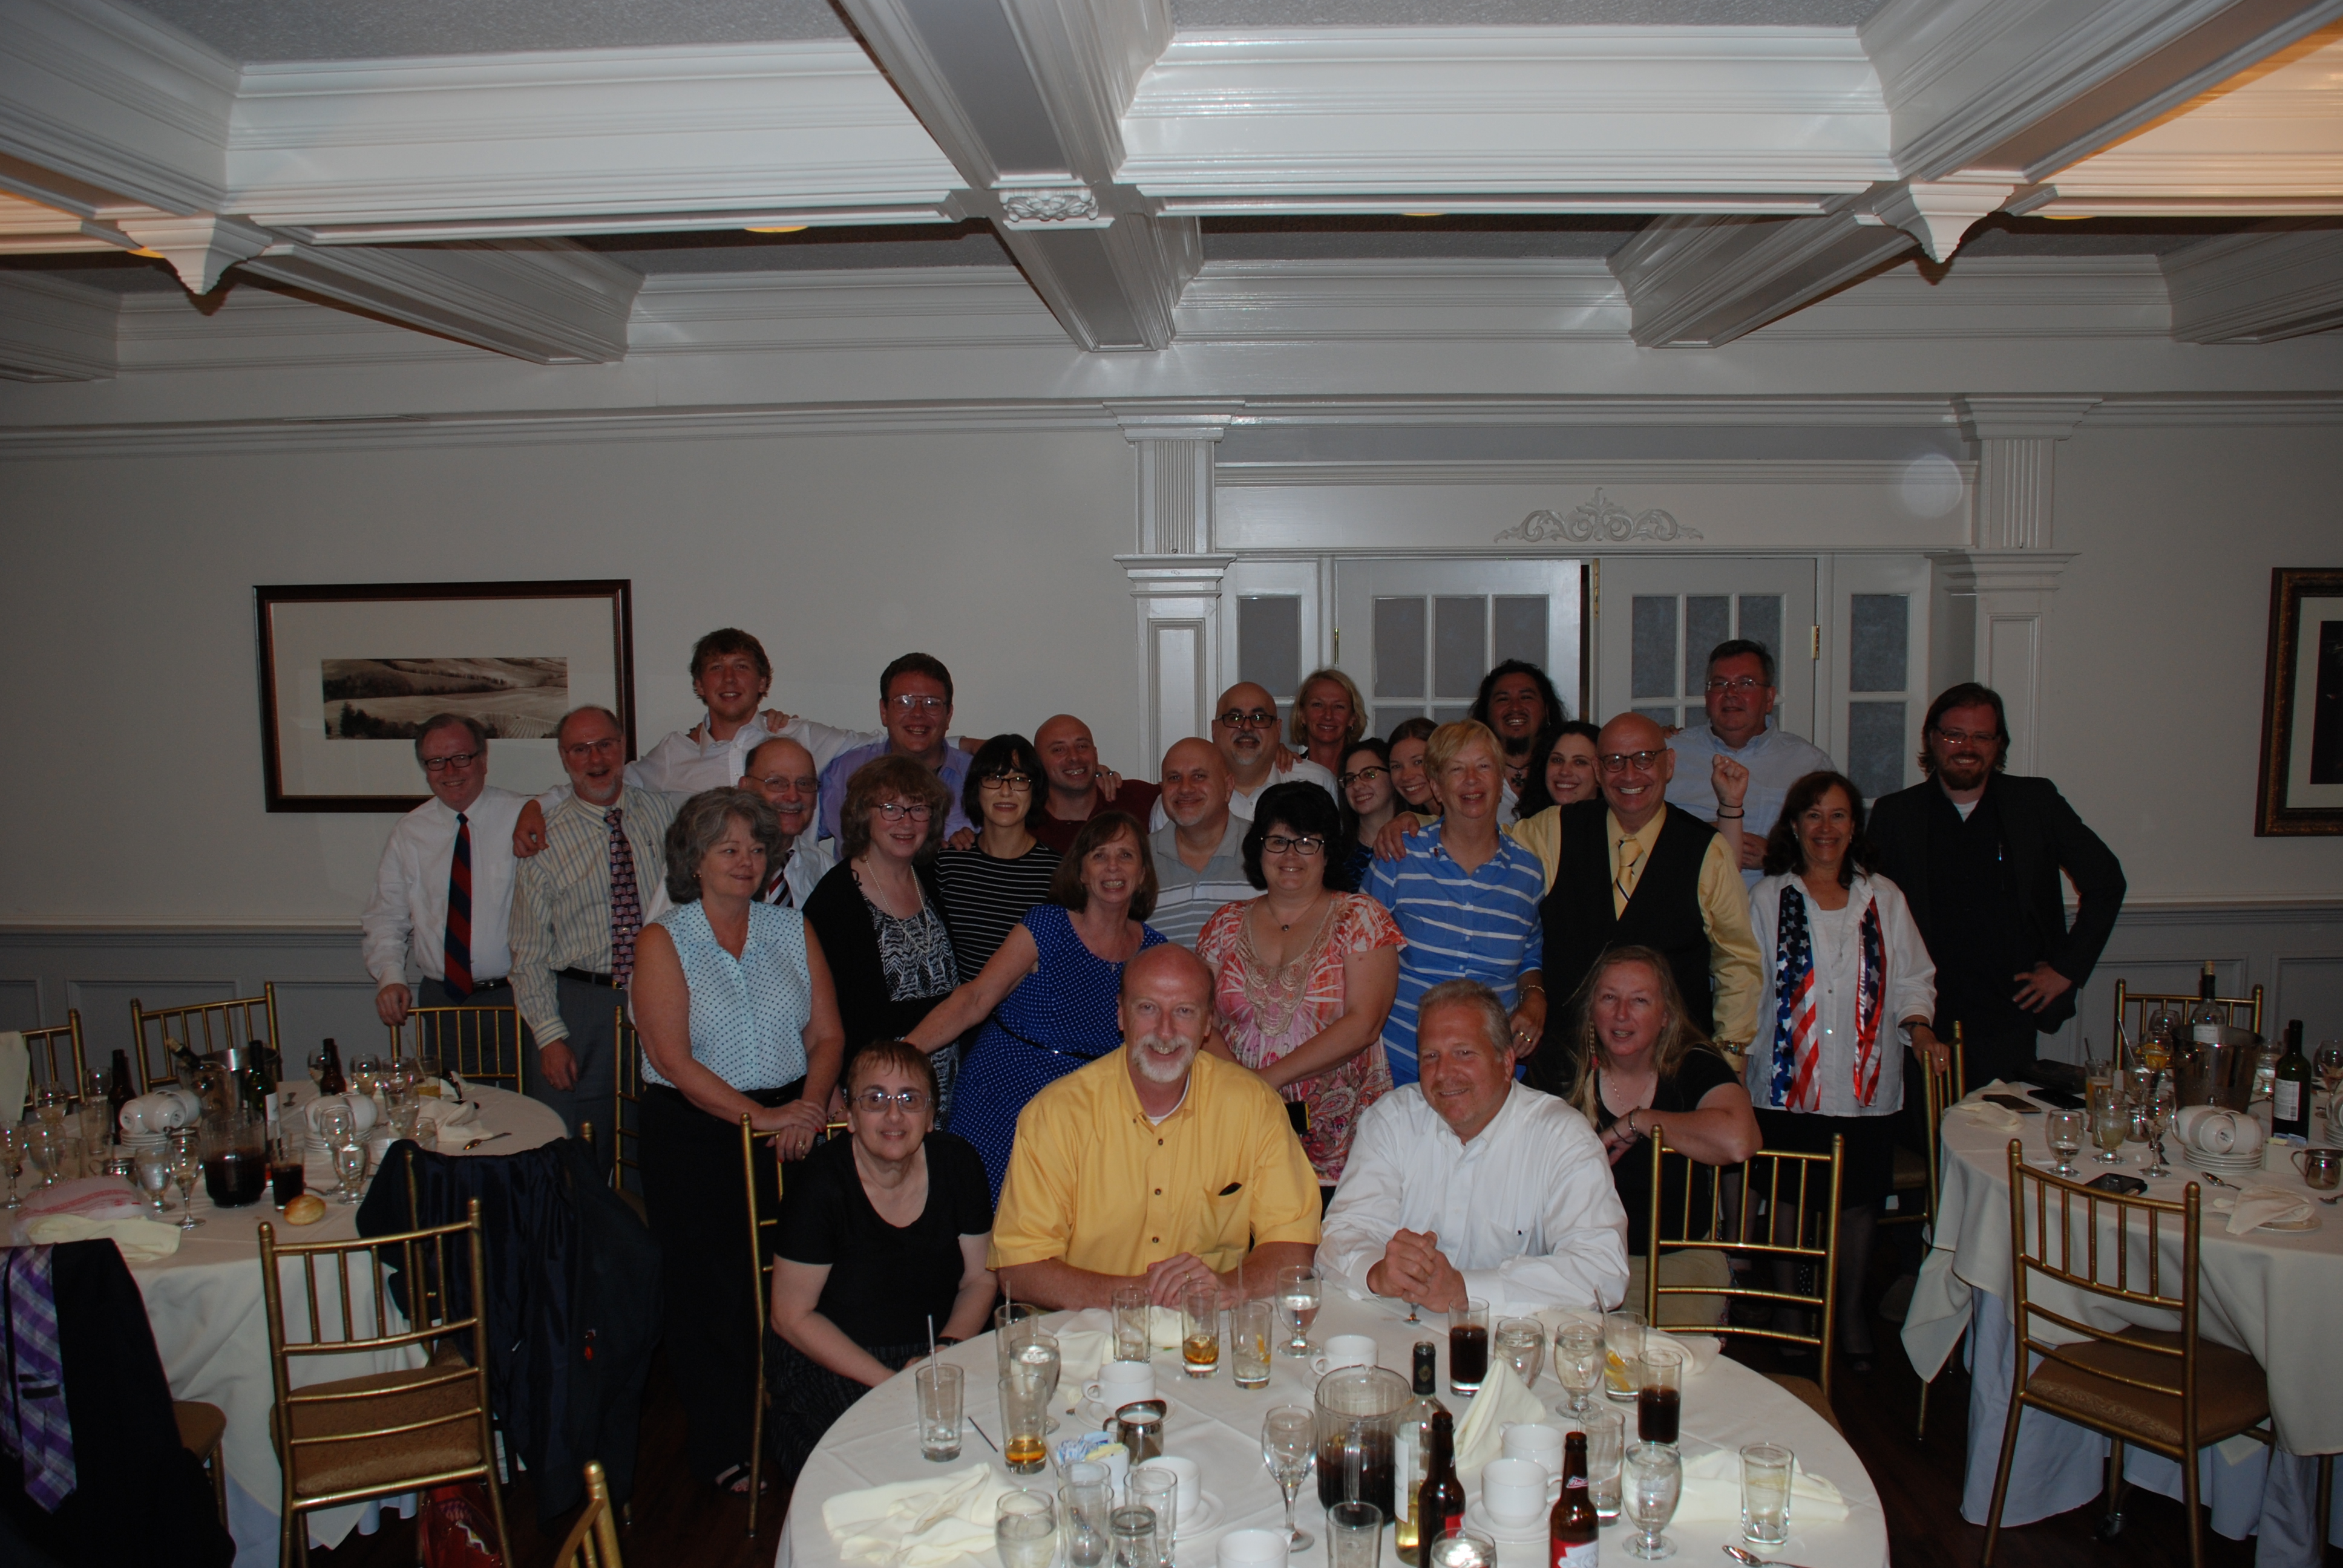 Attendees at the memorial reception. I'm at the very right in the last row.